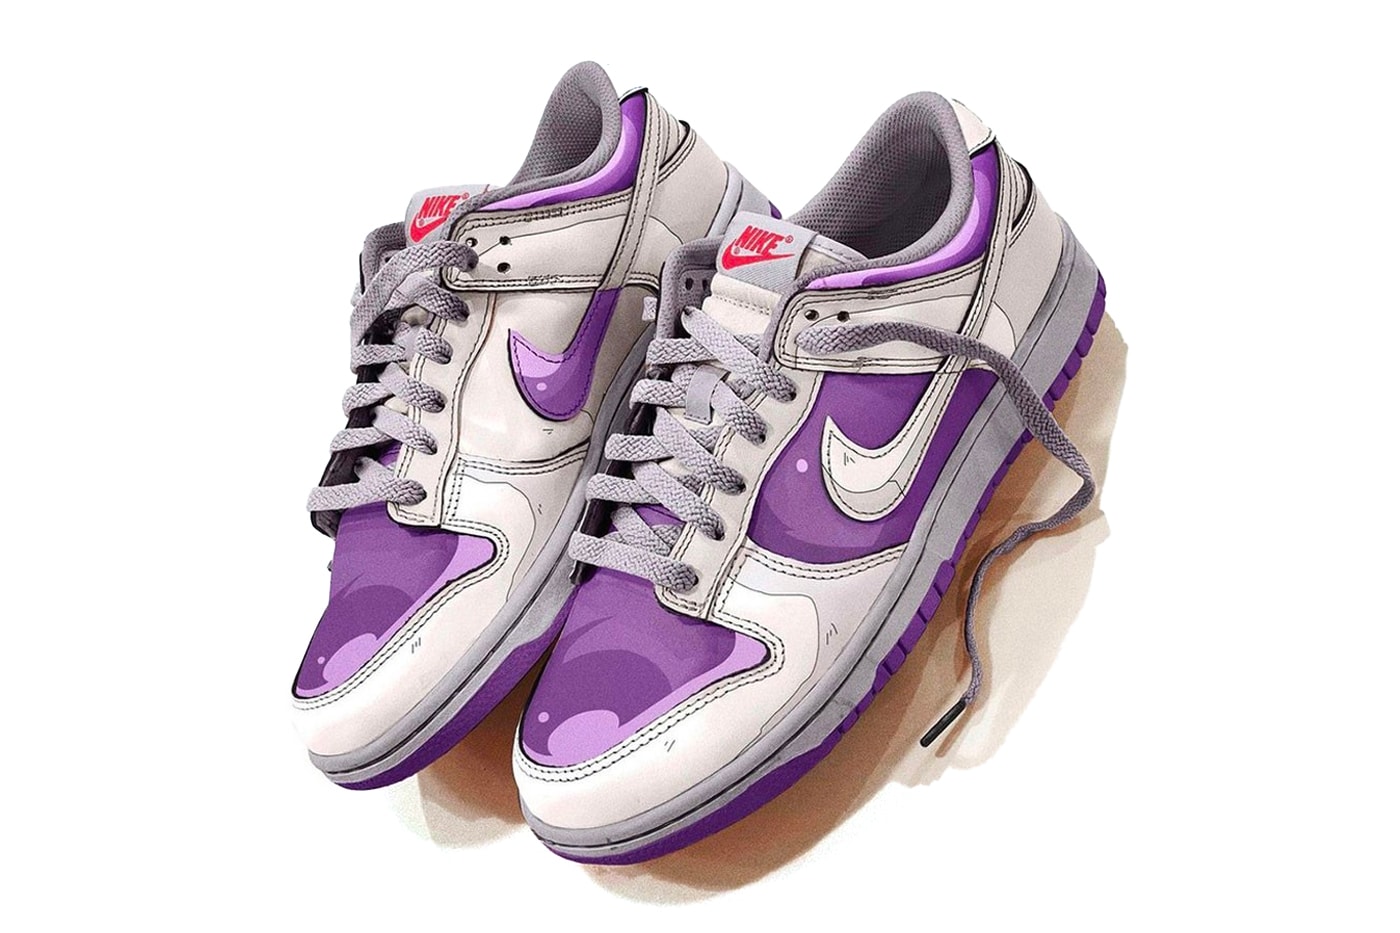 Check Out This Nike Dunk Low “Frieza” Custom Colorway Footwear